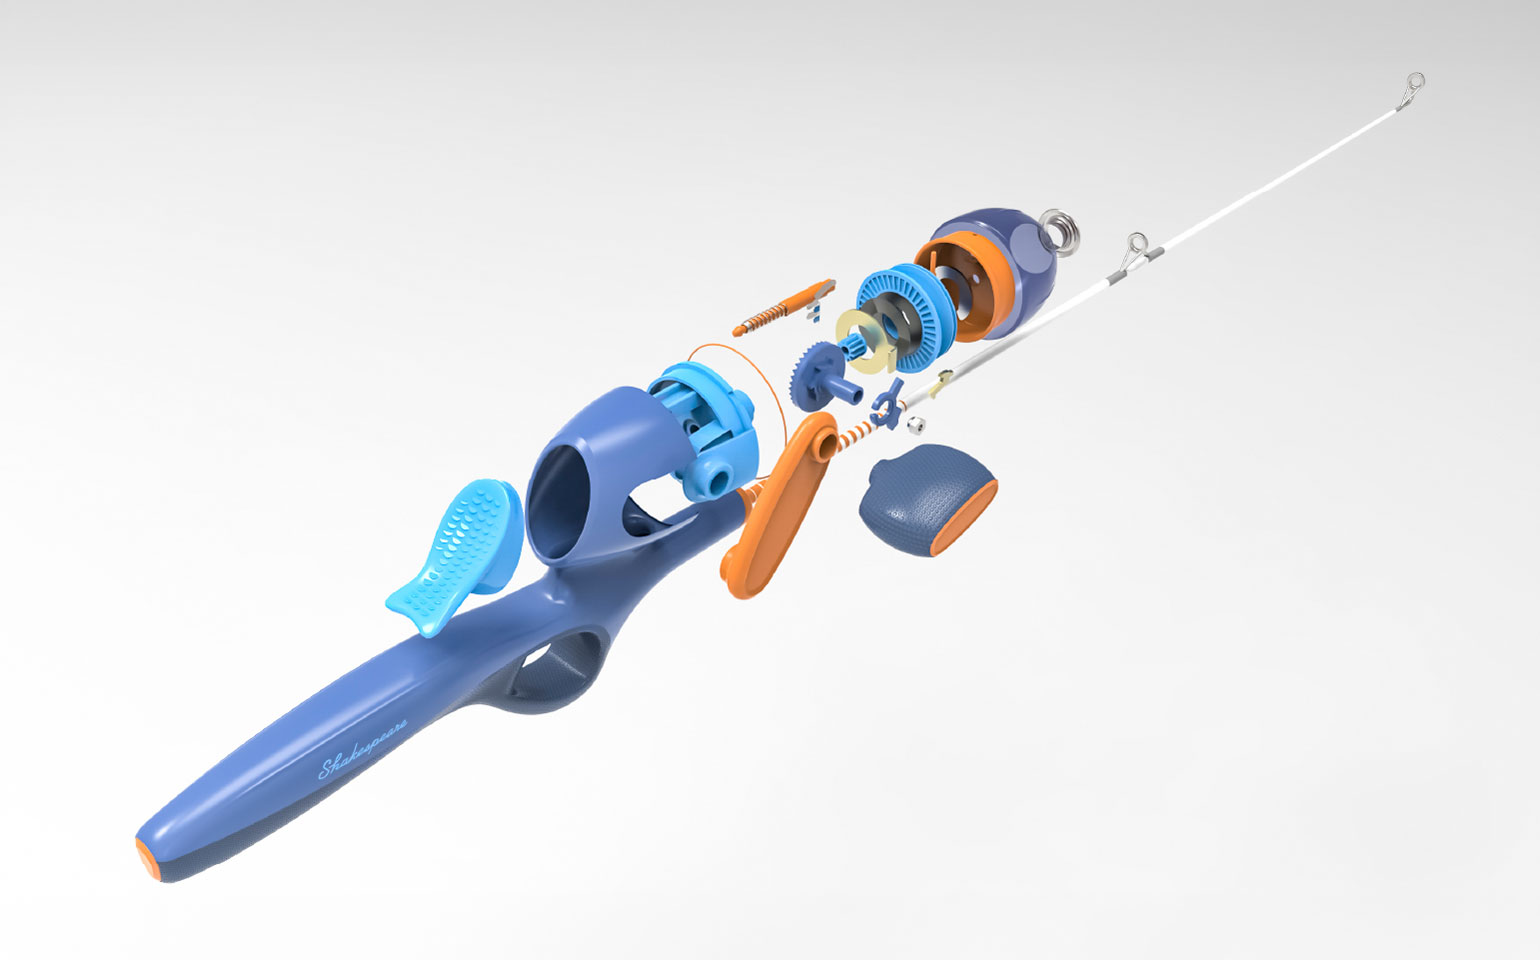 3D rendering of an exploded view of parts of a child's fishing rod